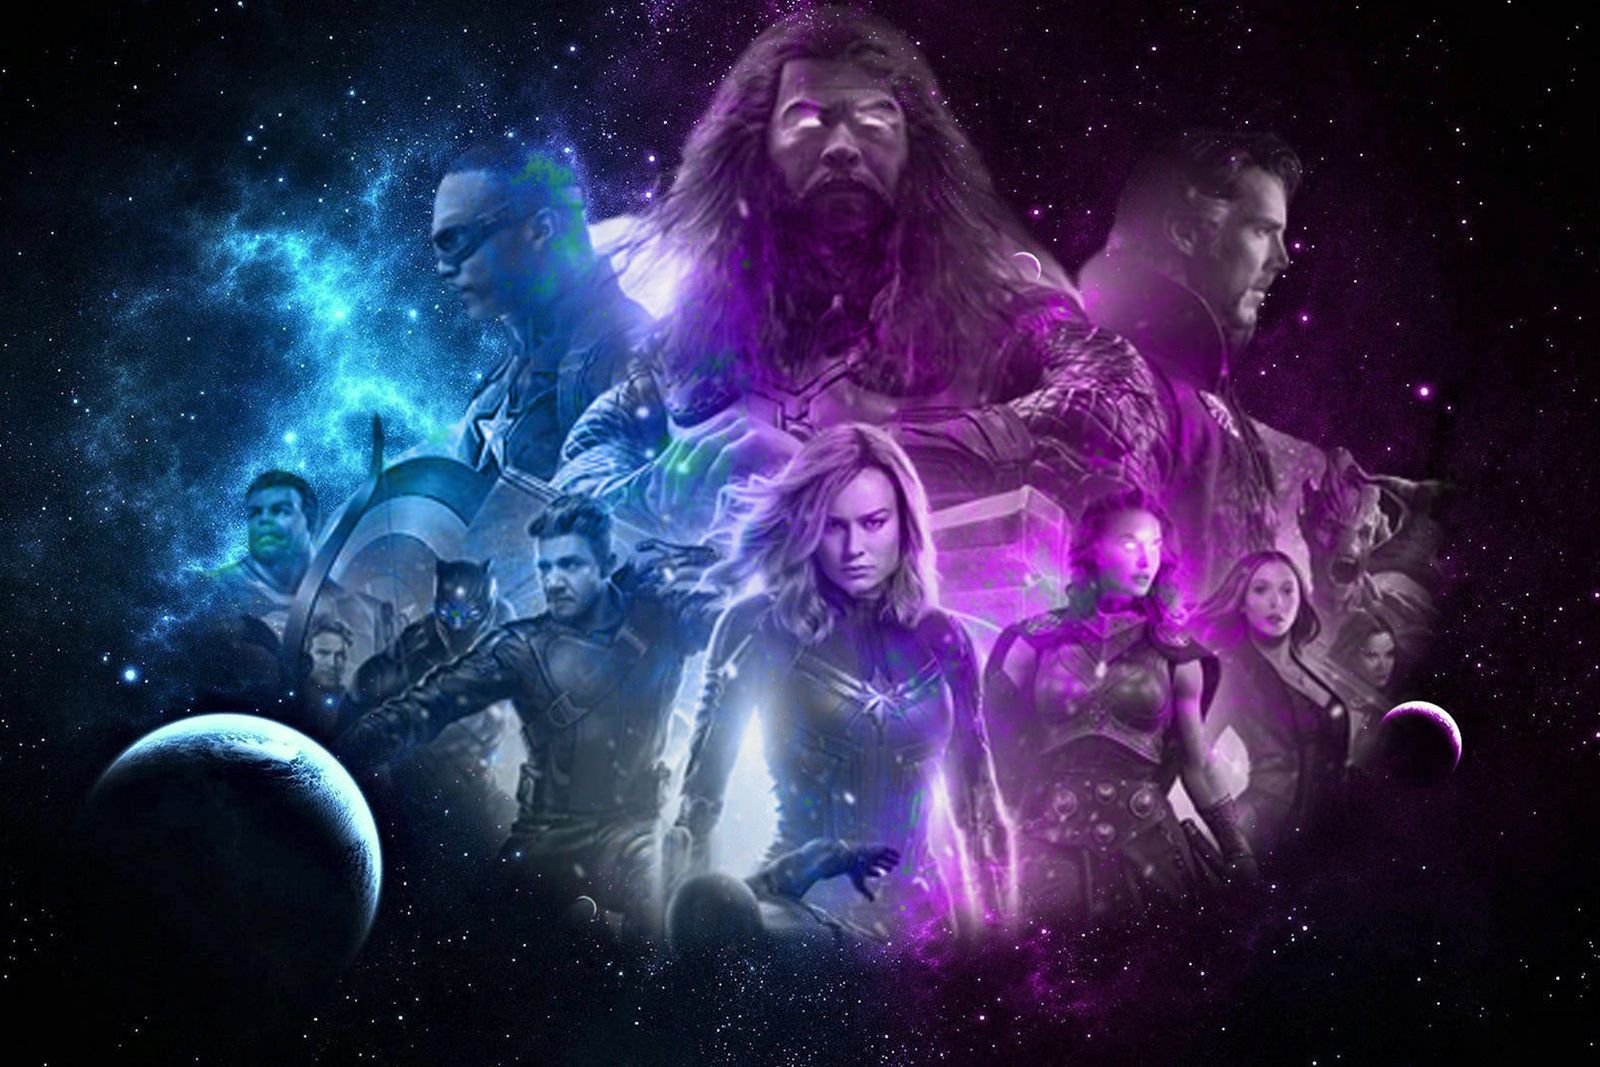 Every Marvel movie and show in chronological order